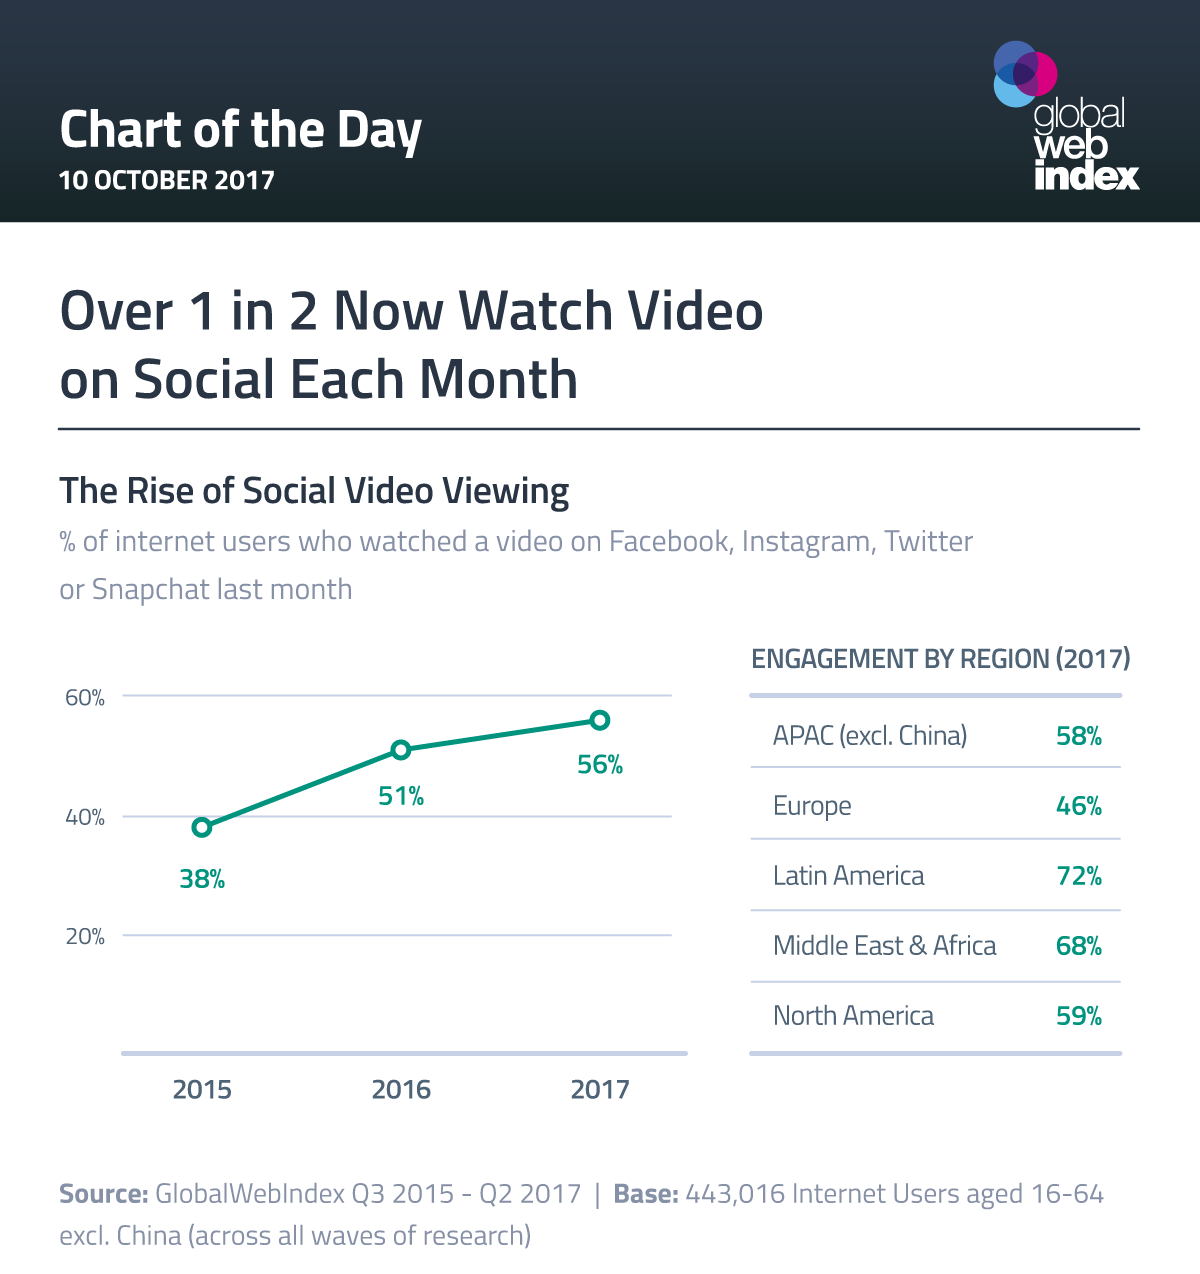 Over 1 in 2 Now Watch Video on Social Each Month